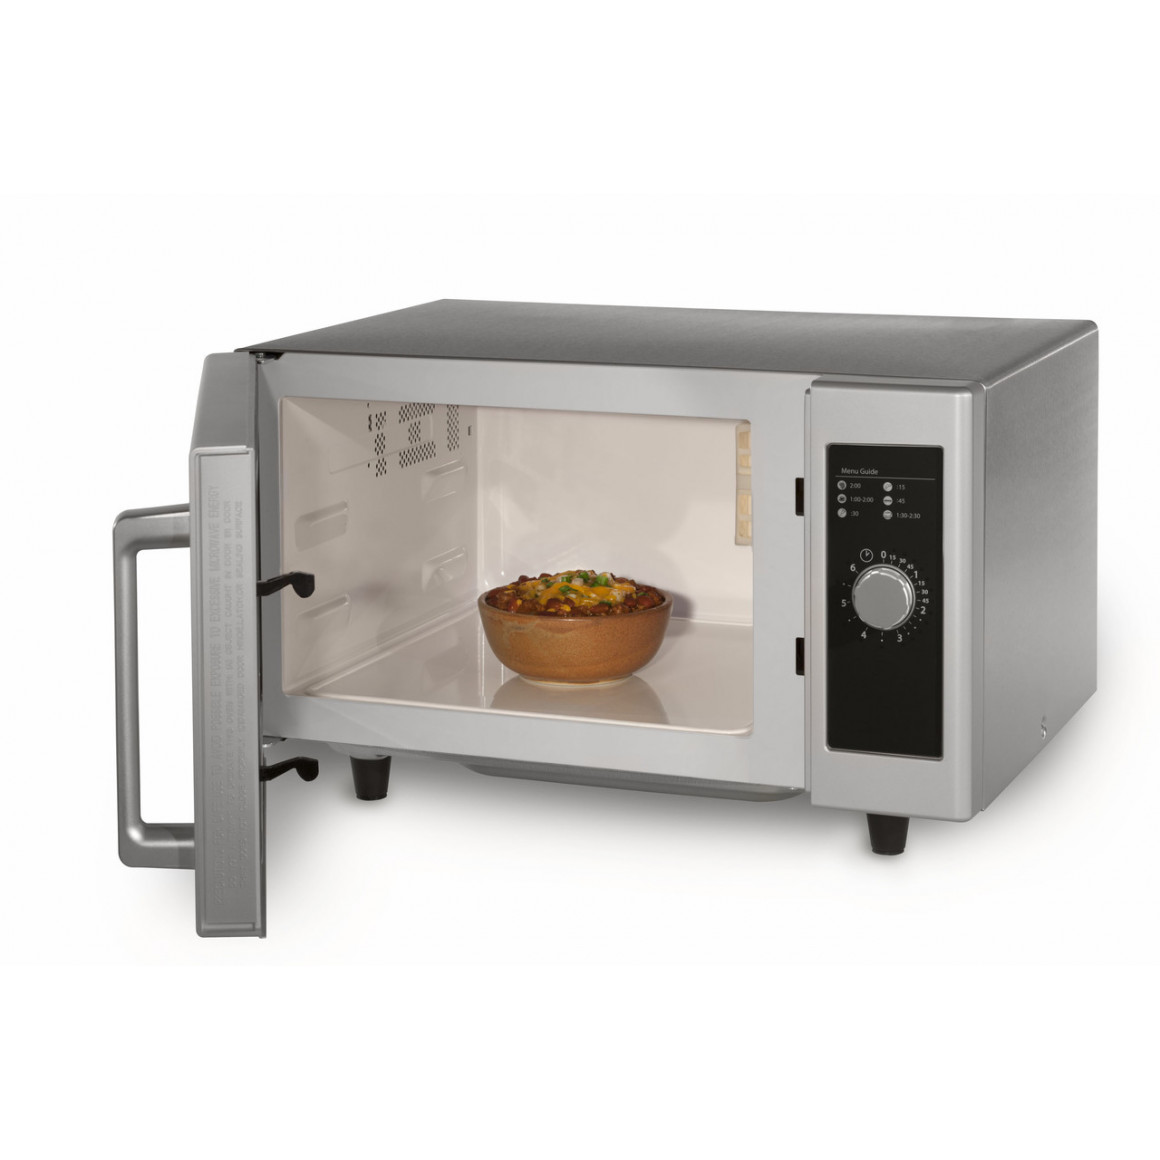 Microwave oven Commercial - CM519